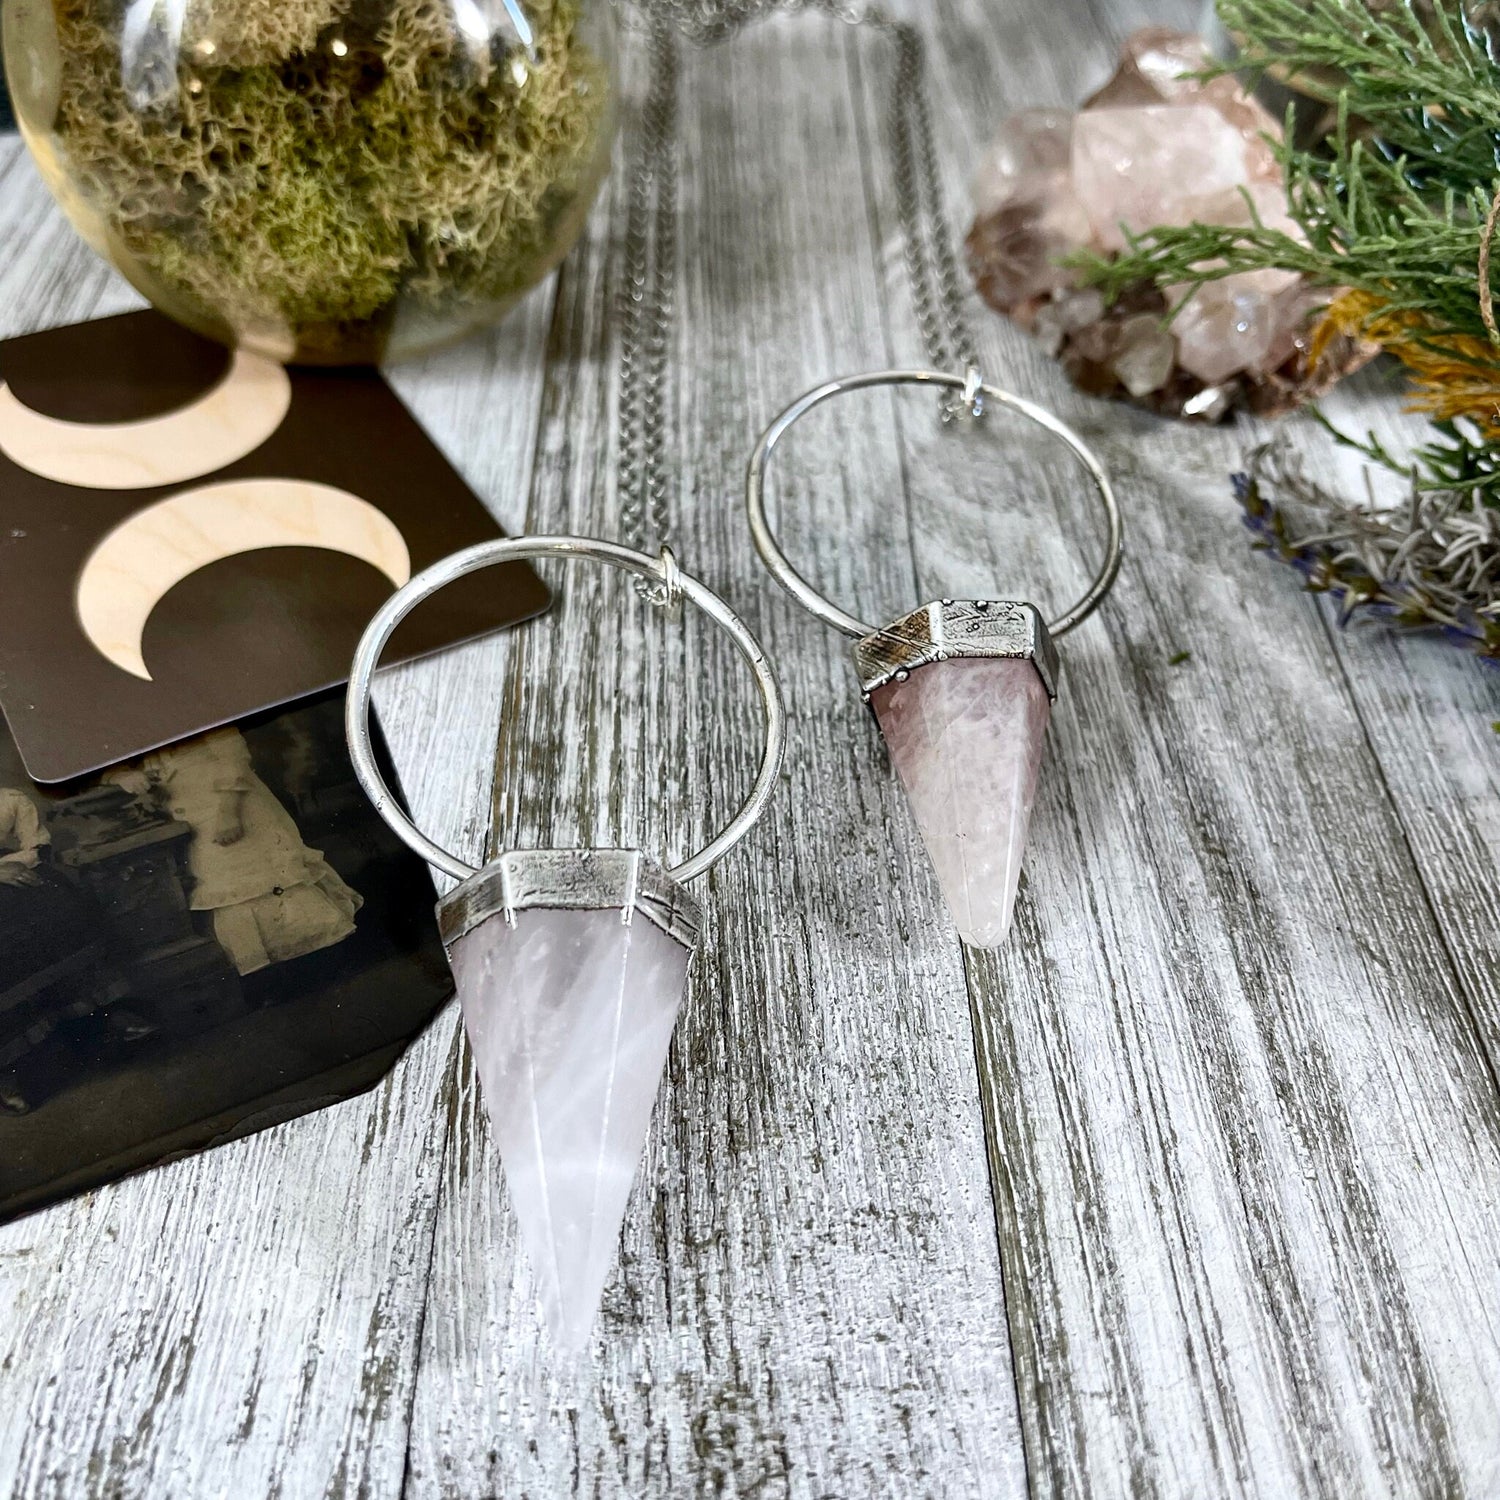 Rose Quartz Crystal Pendulum Necklace Pendant in Fine Silver / Foxlark Collection - One of a Kind